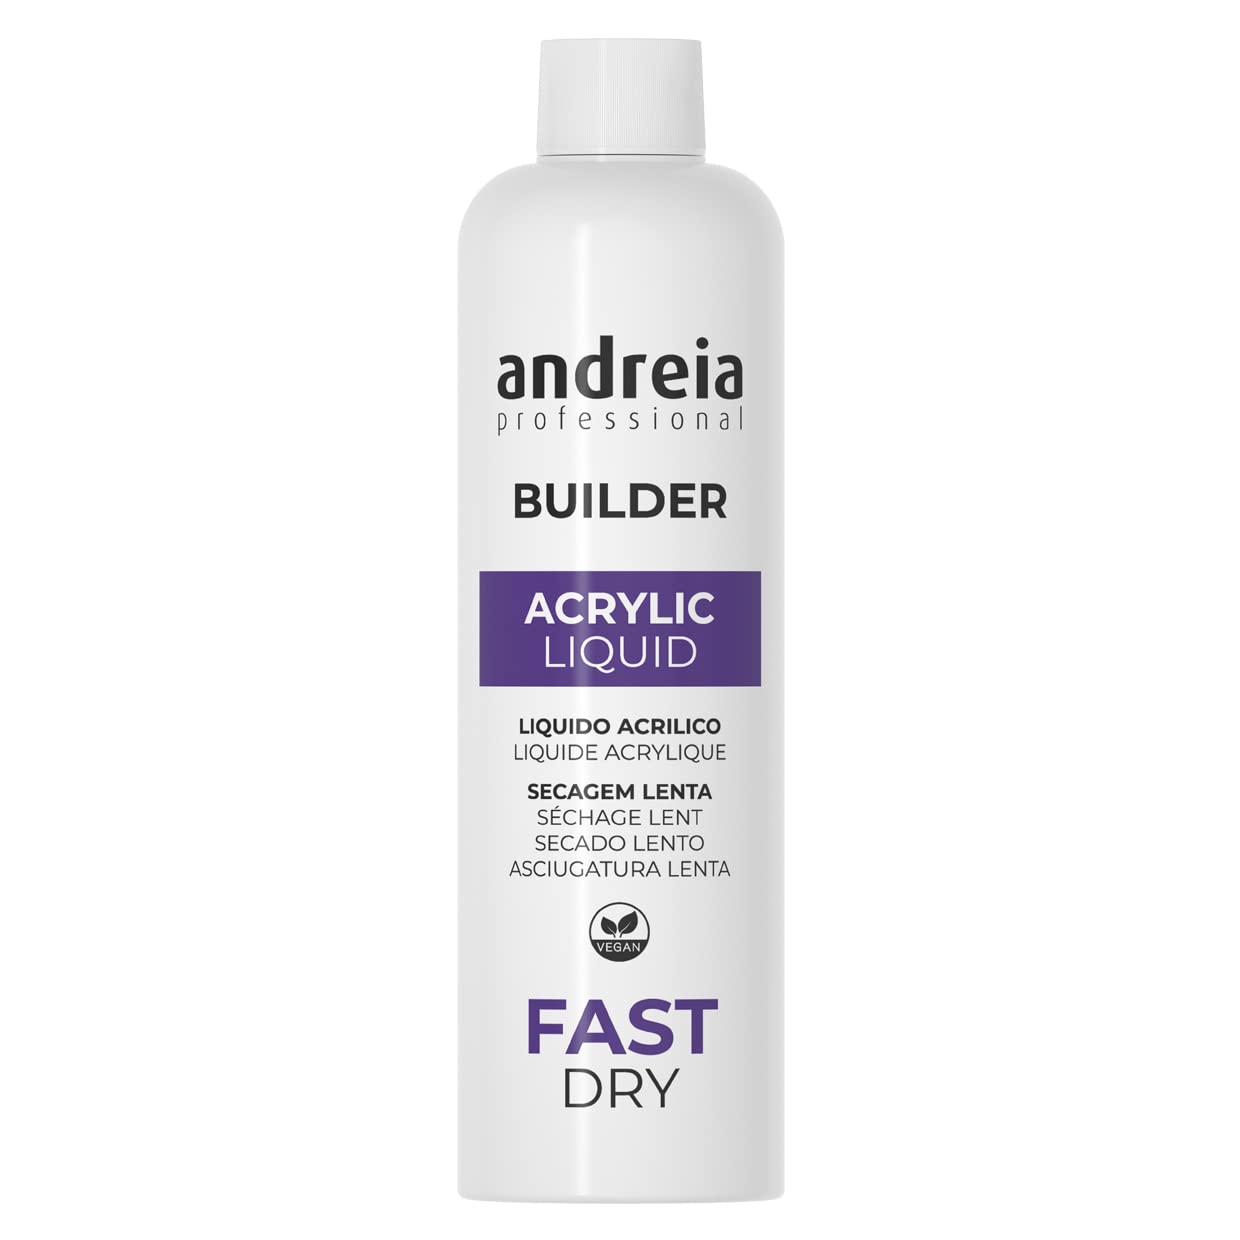 Andreia Professional Nail Builder Acrylic Monomer Liquid - Fast Dry 250 ml - For Professionals - Quick Dry - Salon Quality Strong Adhesion Extensions